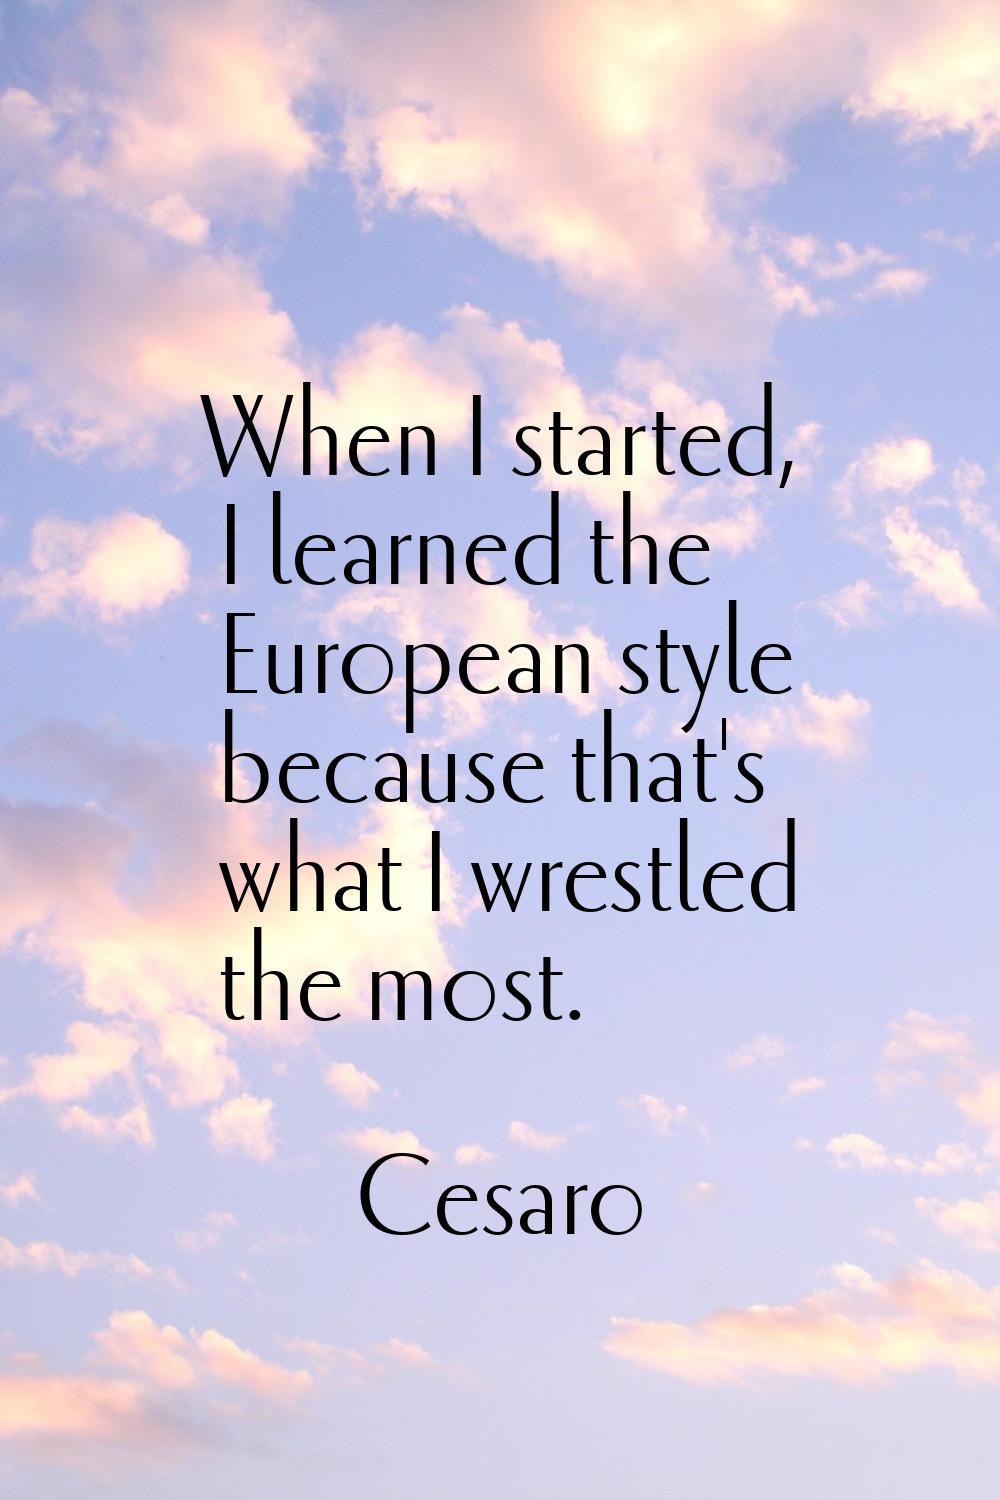 When I started, I learned the European style because that's what I wrestled the most.